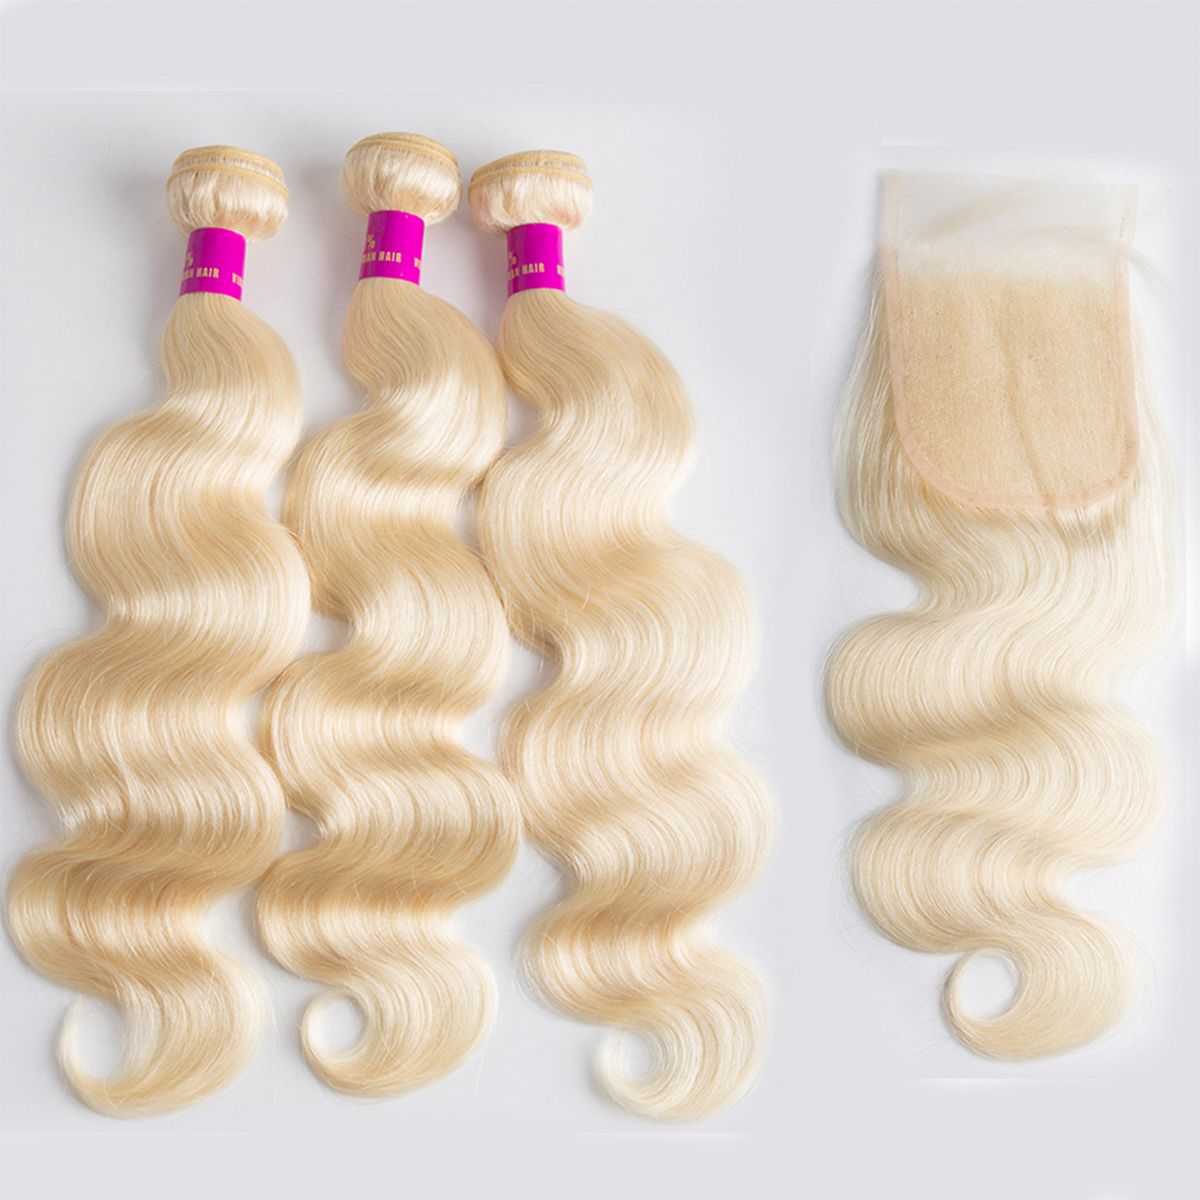 Tinashe hair Brazilian blonde bundle hair with closure color 613 blonde body wave 3 bundles with lace closure